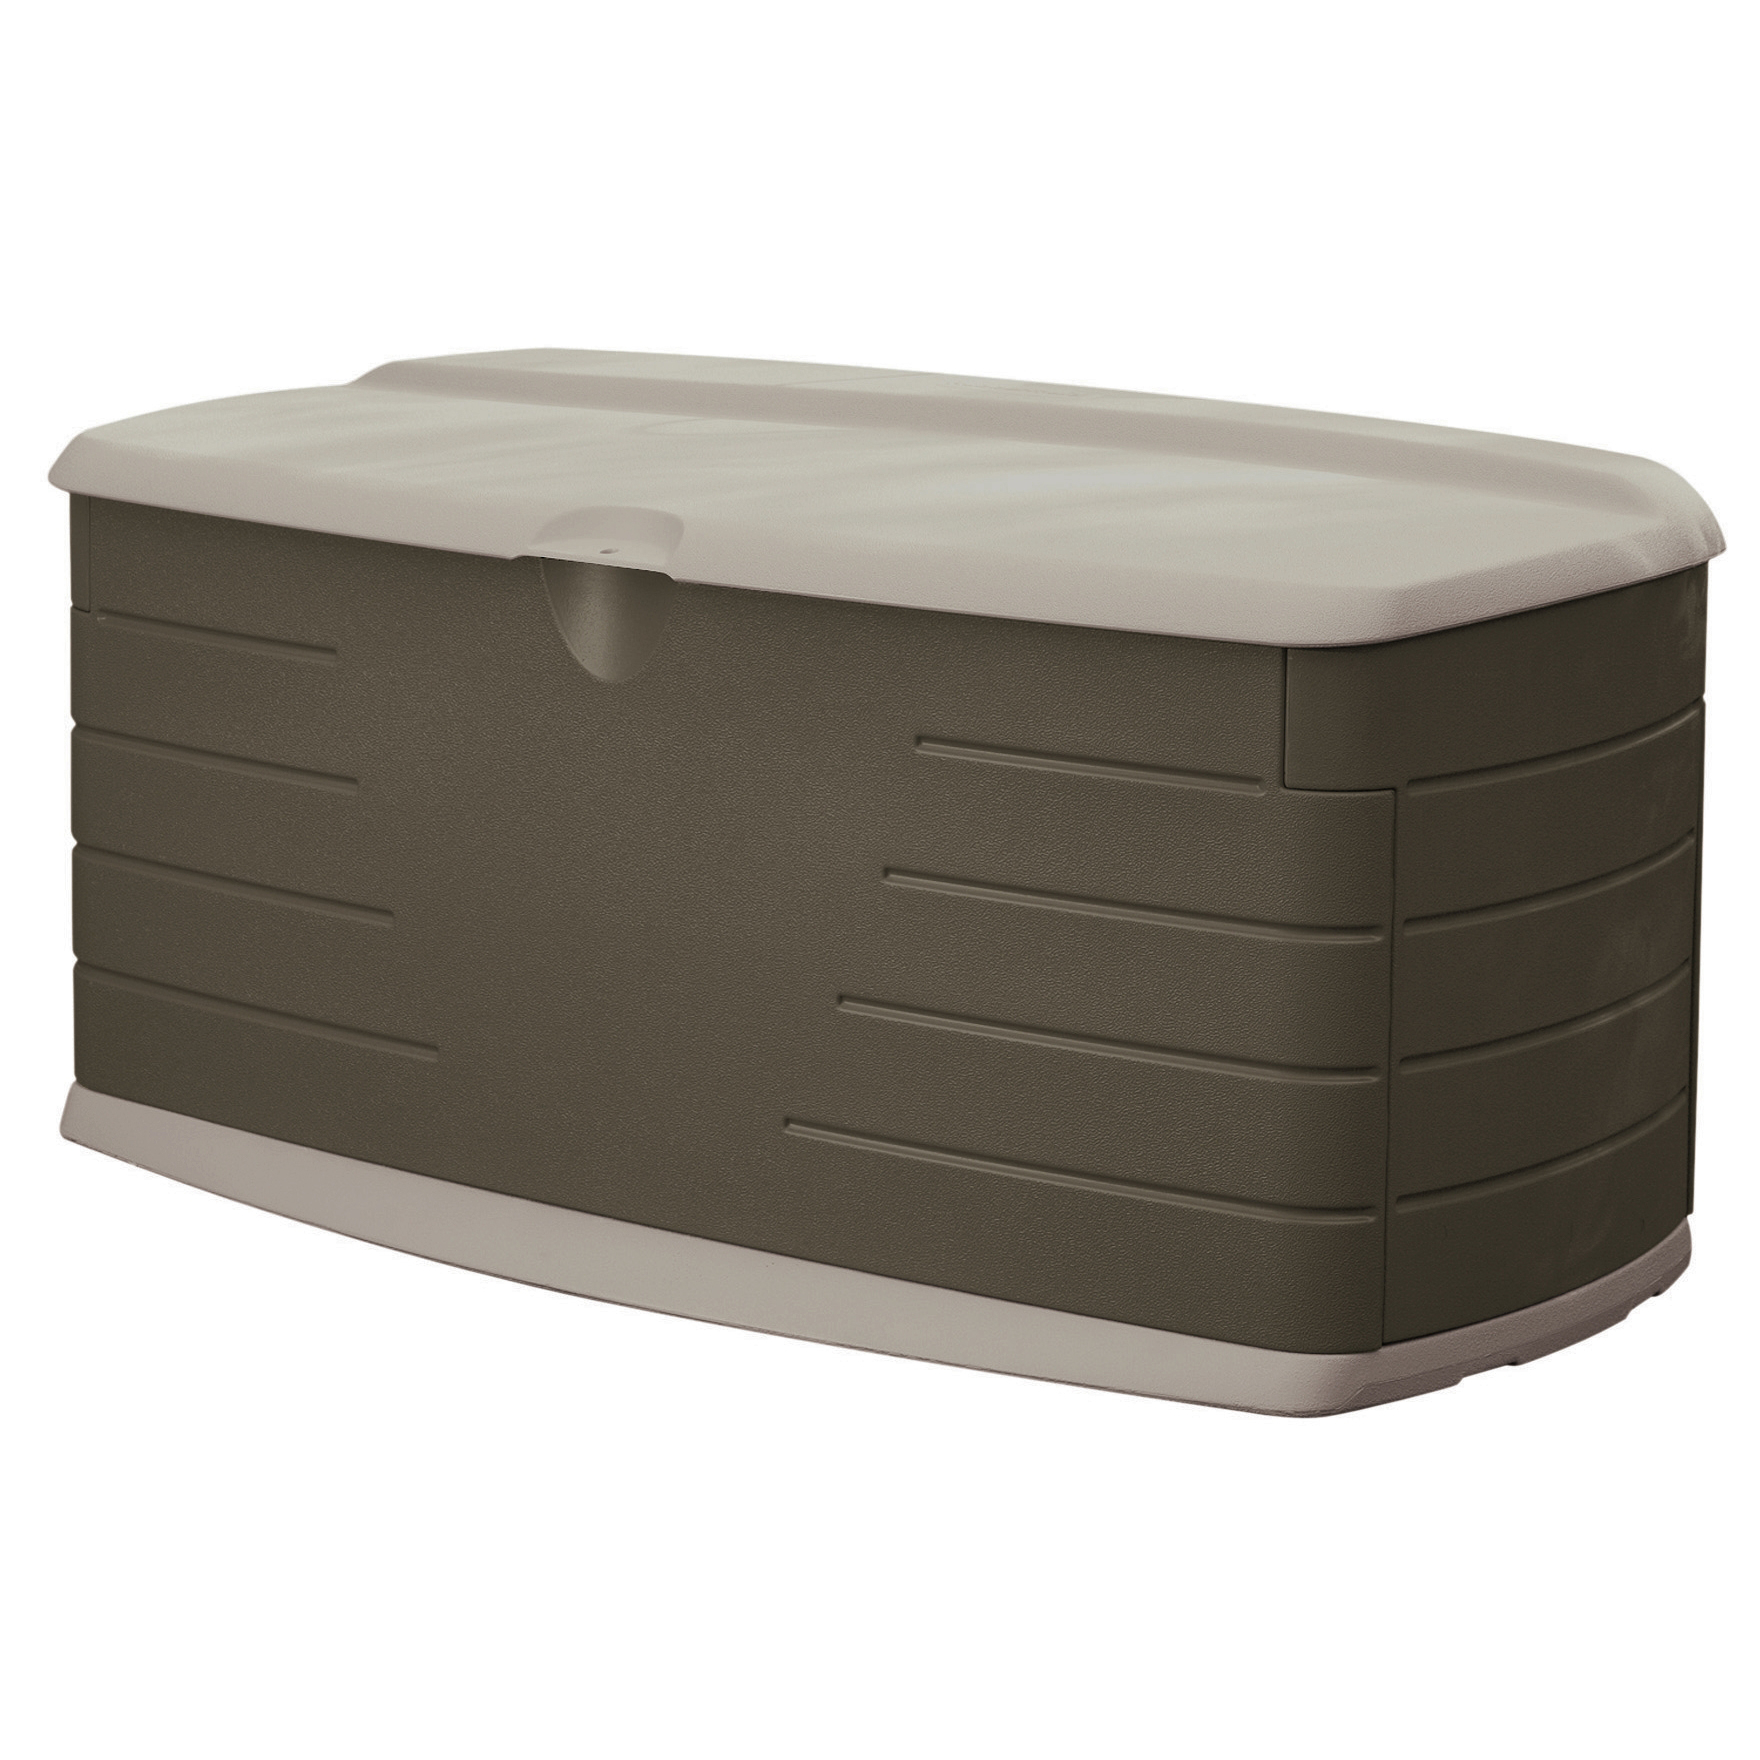 Rubbermaid Outdoor Large Deck Box with Seat, Green, 90 Gallon - image 1 of 5